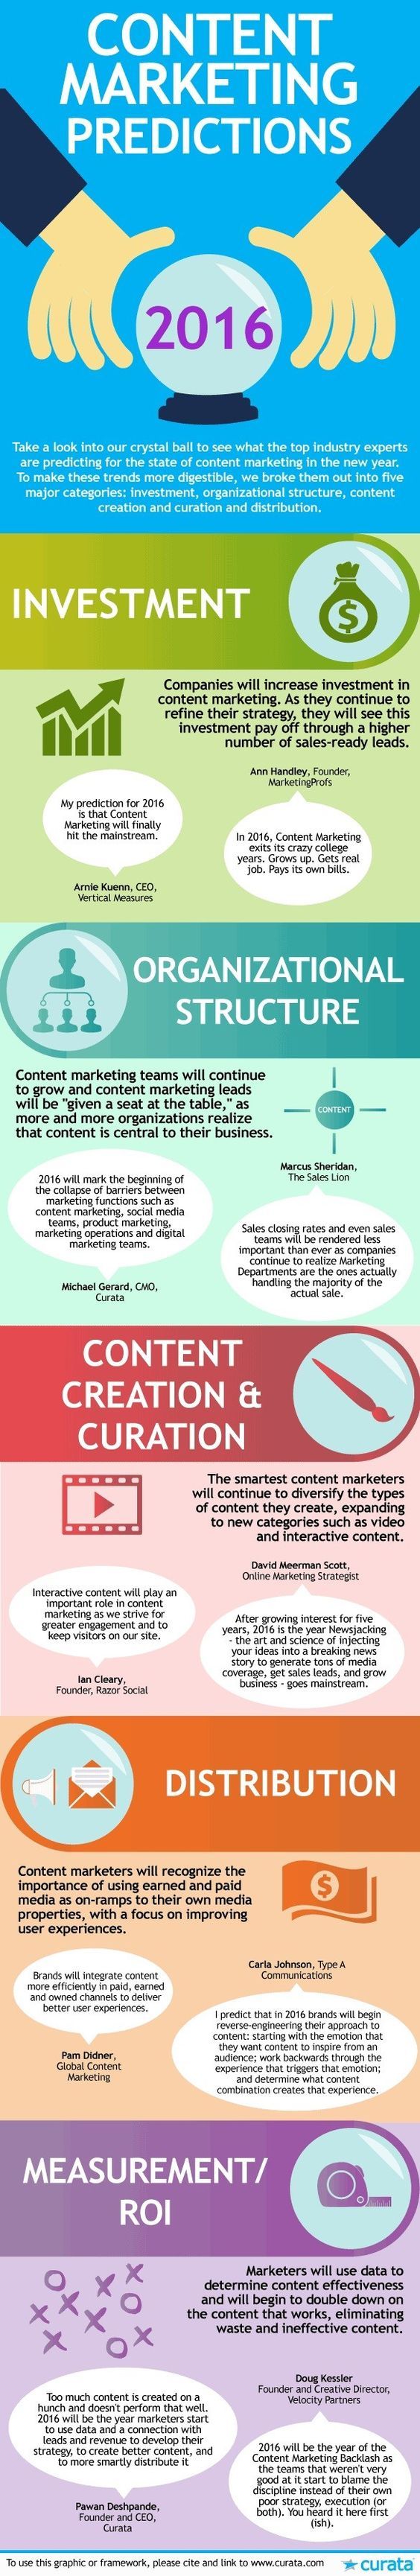 Content - Content Marketing Predictions for 2016 [Infographic] - @MarketingProfs